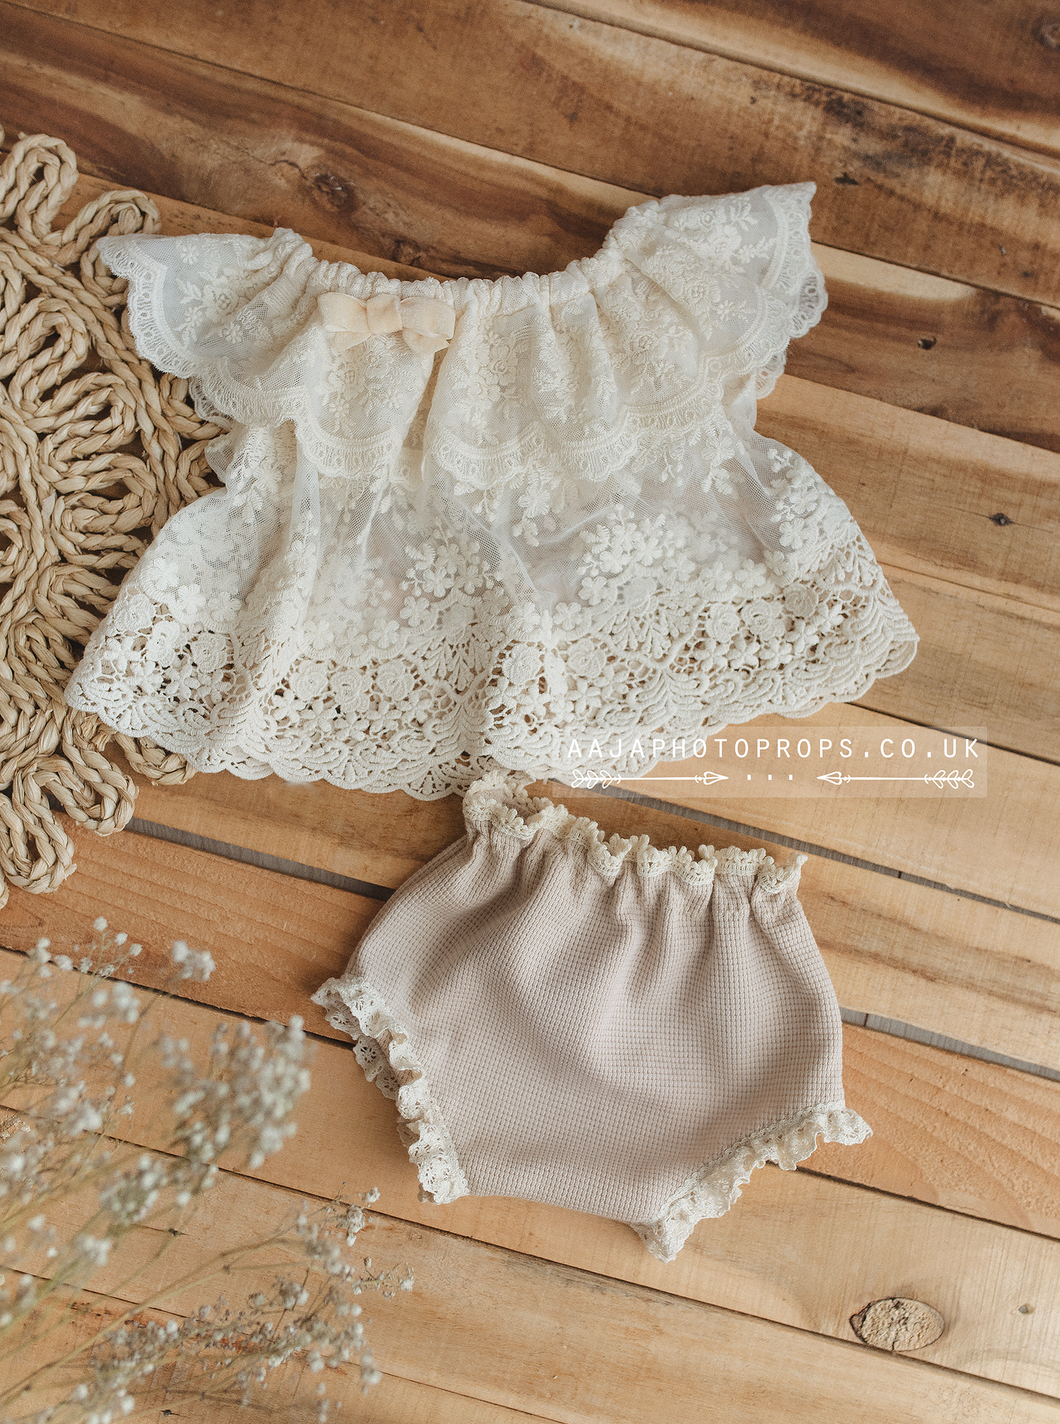 6-12 months size girl cream lace top dress and pants, vintage style, boho, RTS